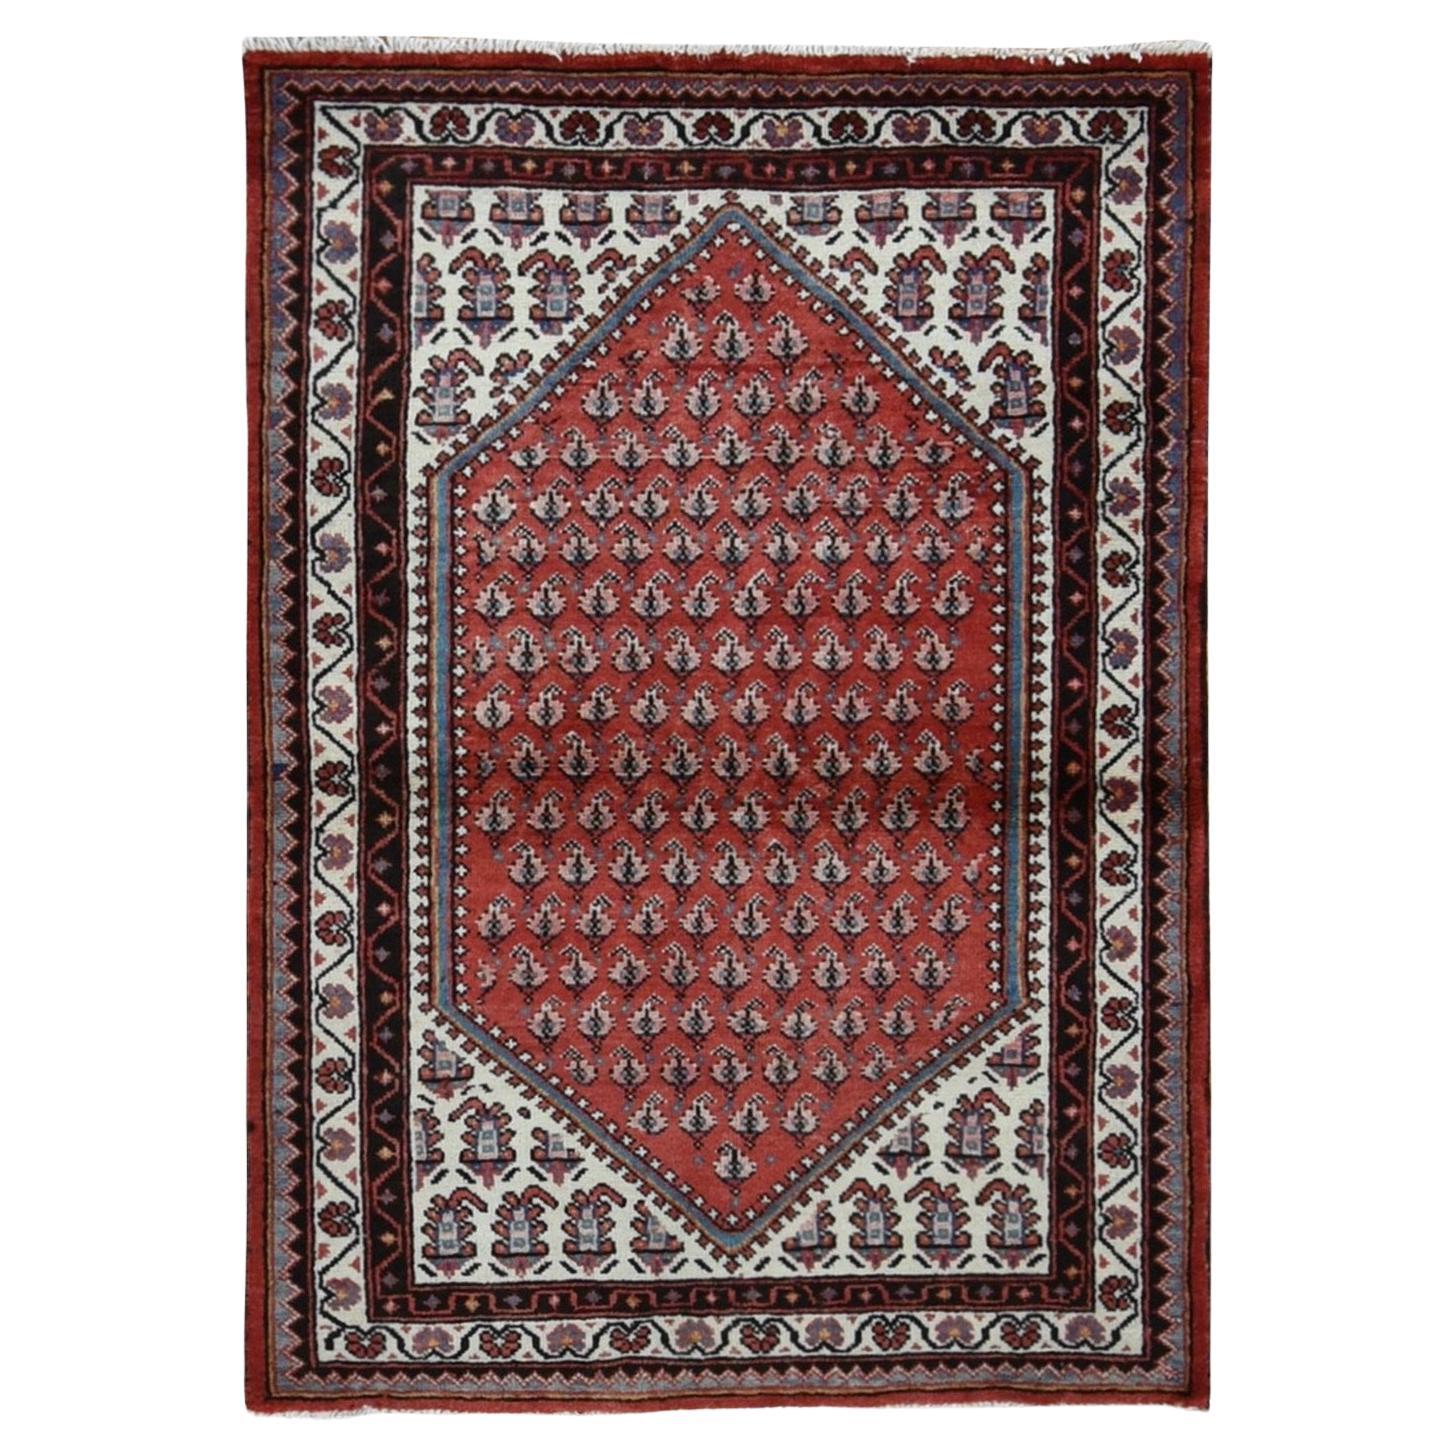 Fire Brick Red Pure Wool Vintage Sarouk Mir with Boteh Design Hand Knotted Rug